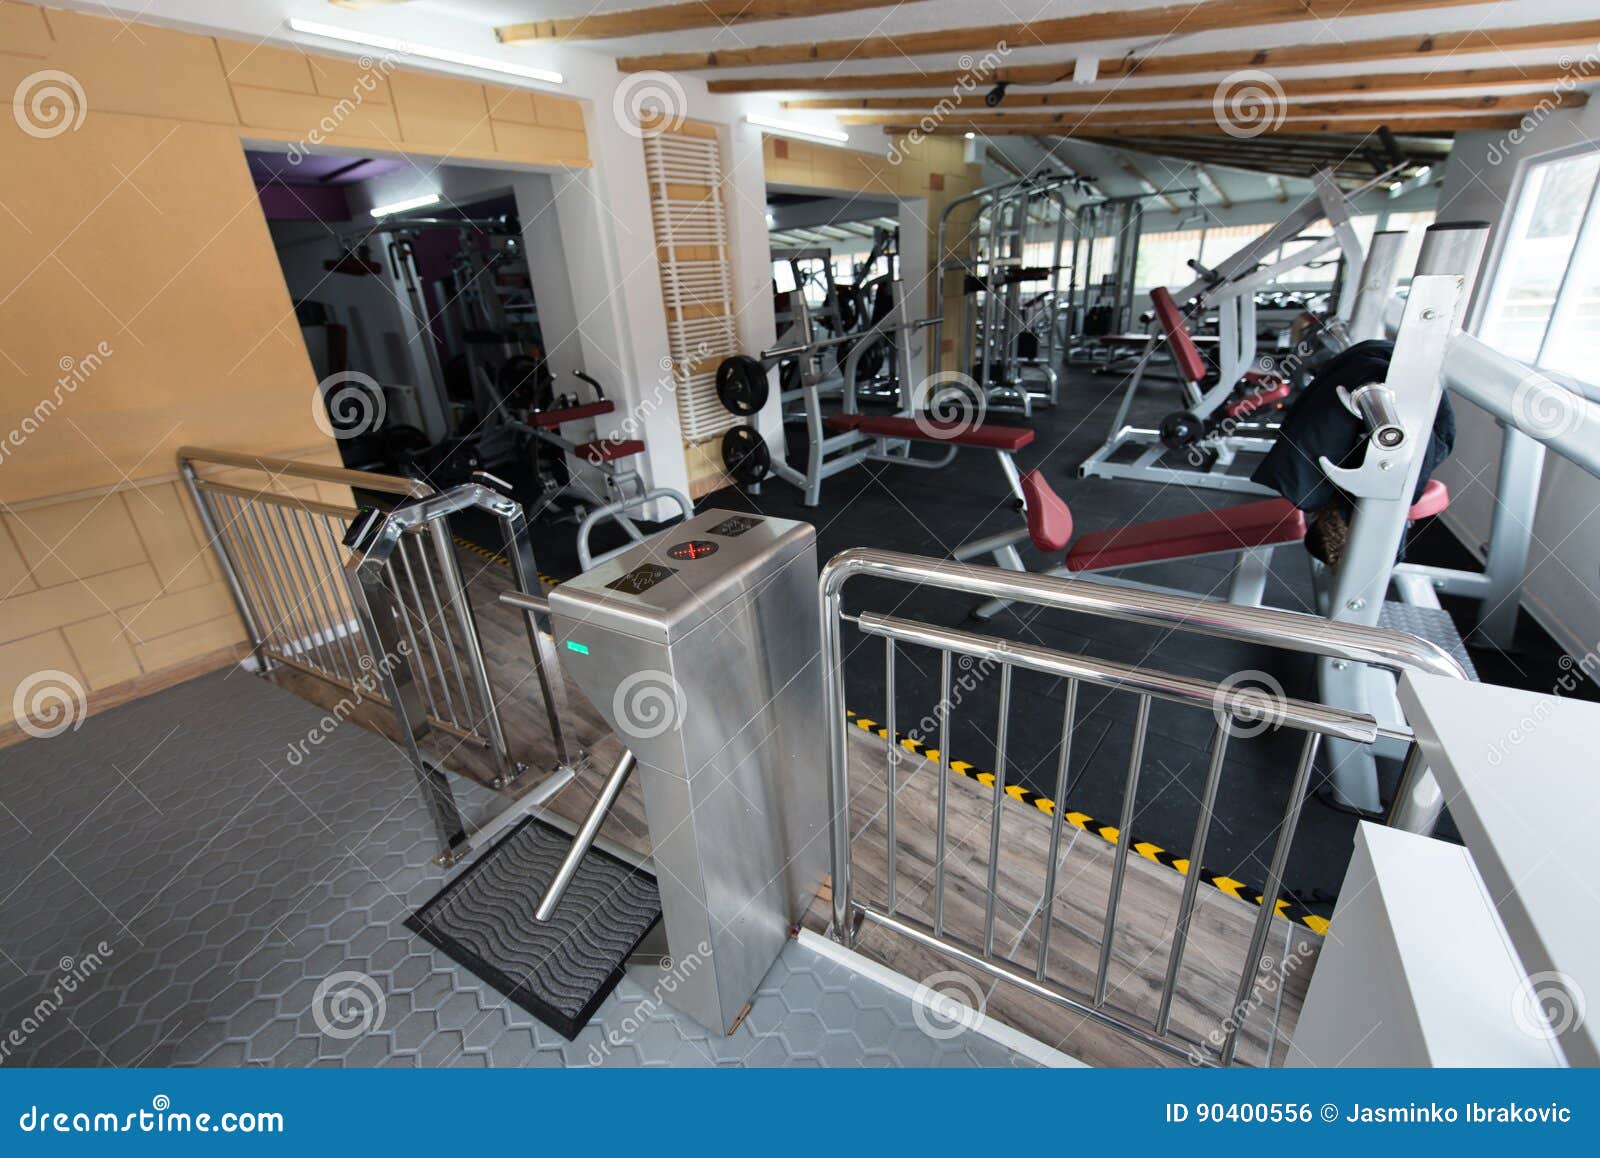  What Time Does The Fitness Center Close for Beginner